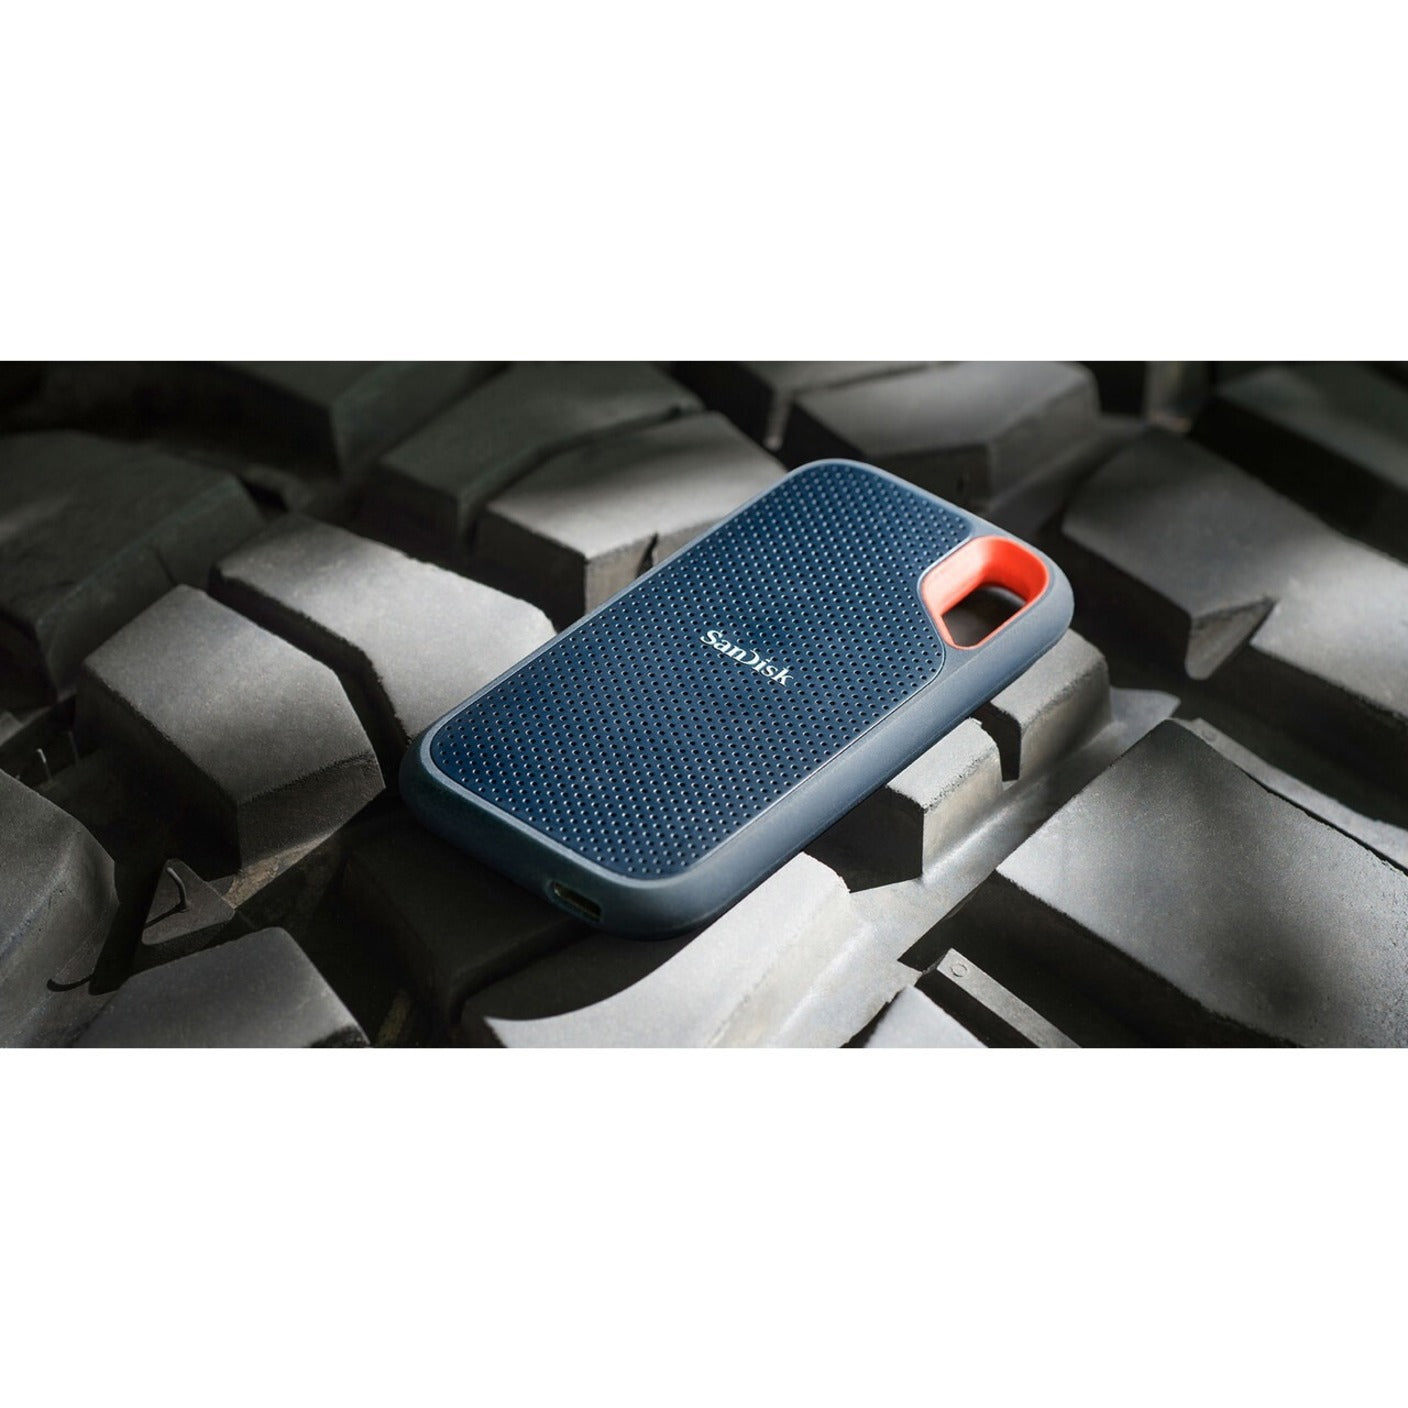 SanDisk SDSSDE61-2T00-G25 Extreme Portable SSD 2TB, Fast and Reliable Solid State Drive